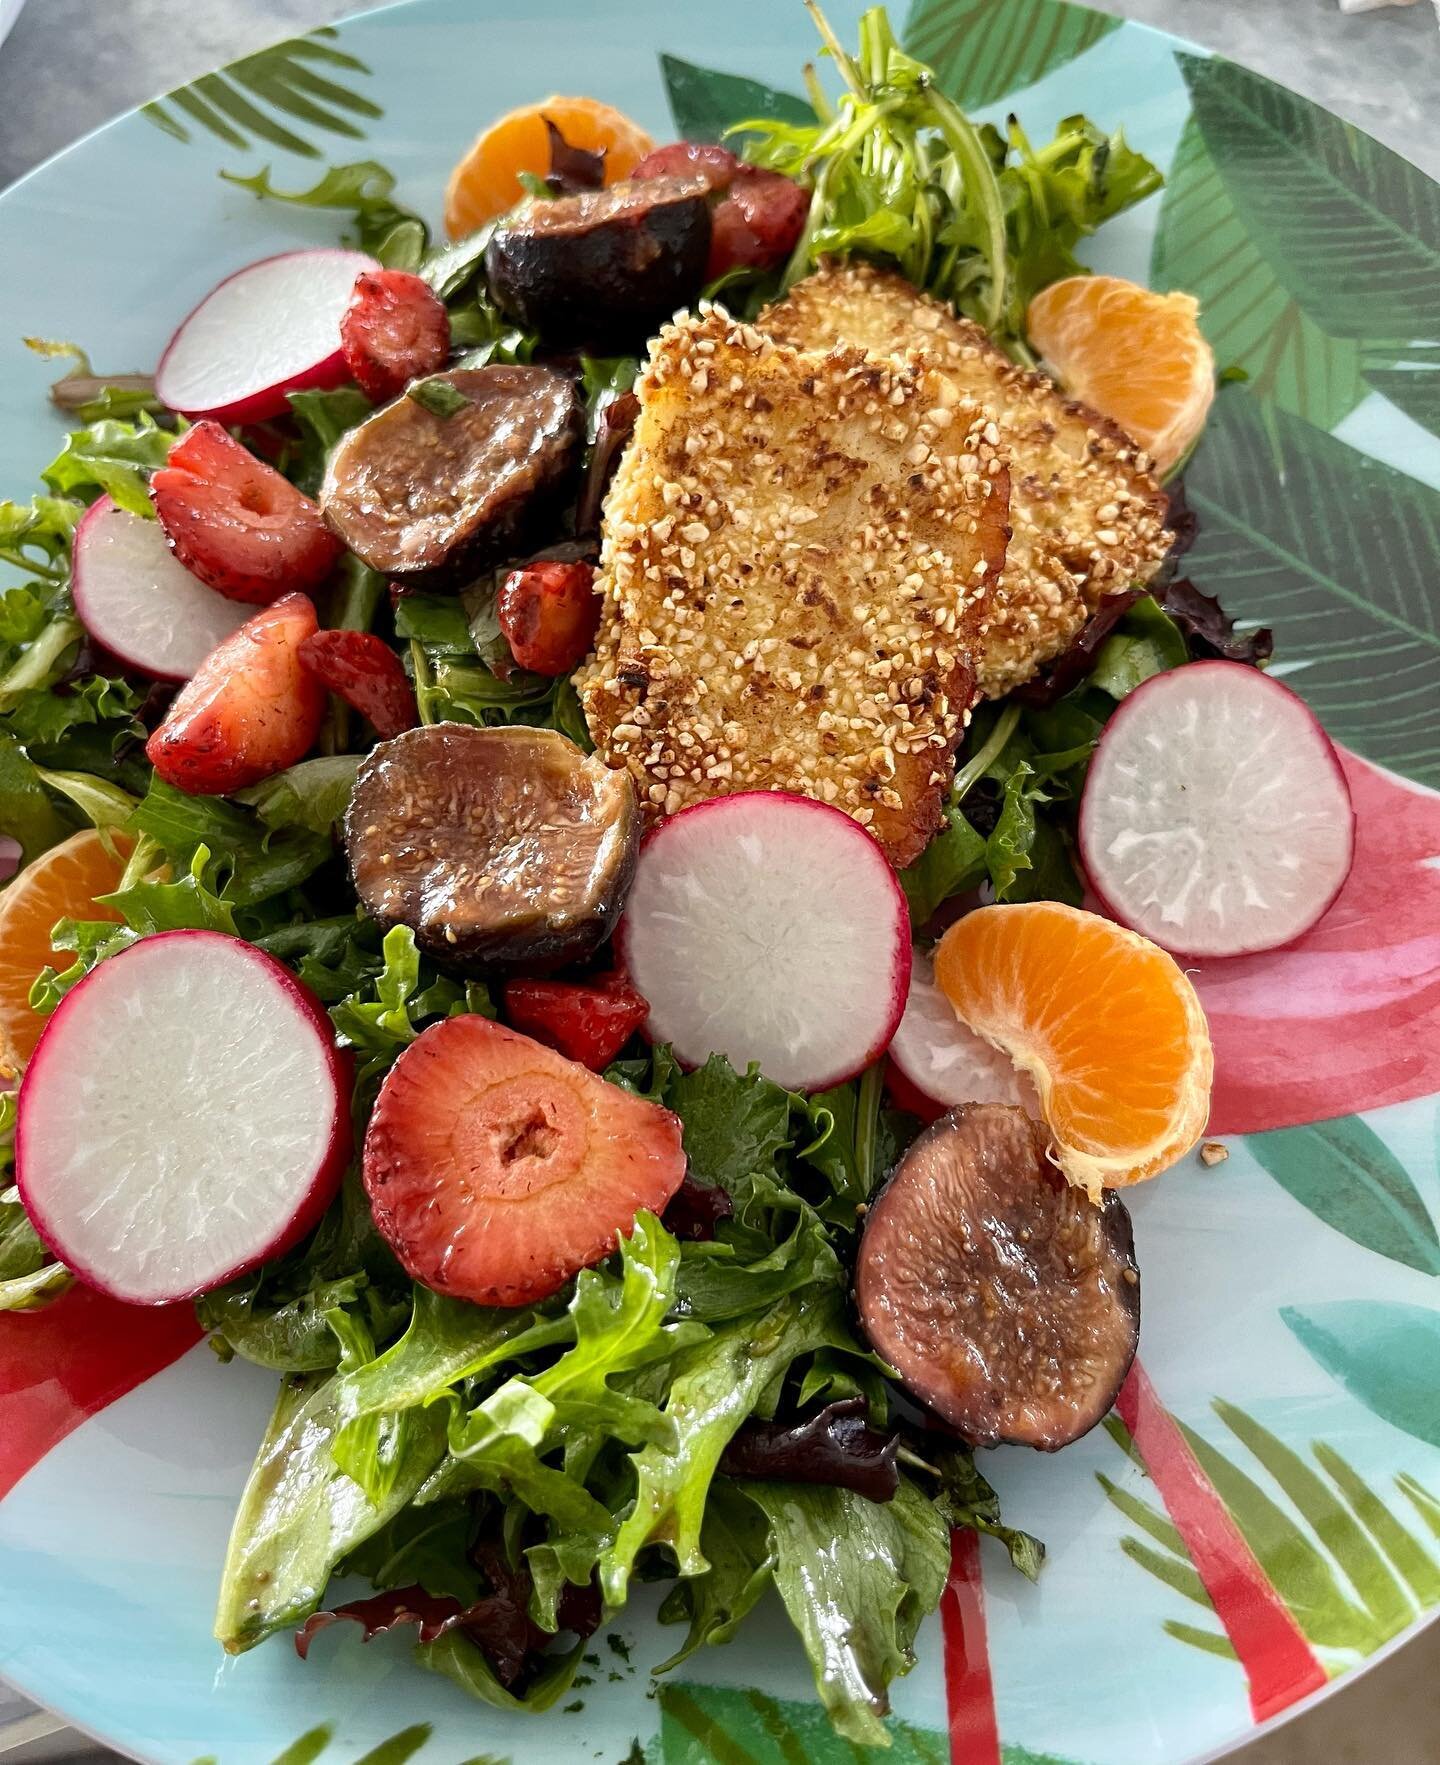 Lunch Al Fresco at home. Polenta crusted Haloumi with spring mix &amp; Arugula in a Balsamic Vinaigrette with marinated figs, strawberries, radishes &amp; clementines.  Perfect! @stressfreecookingwithcolor